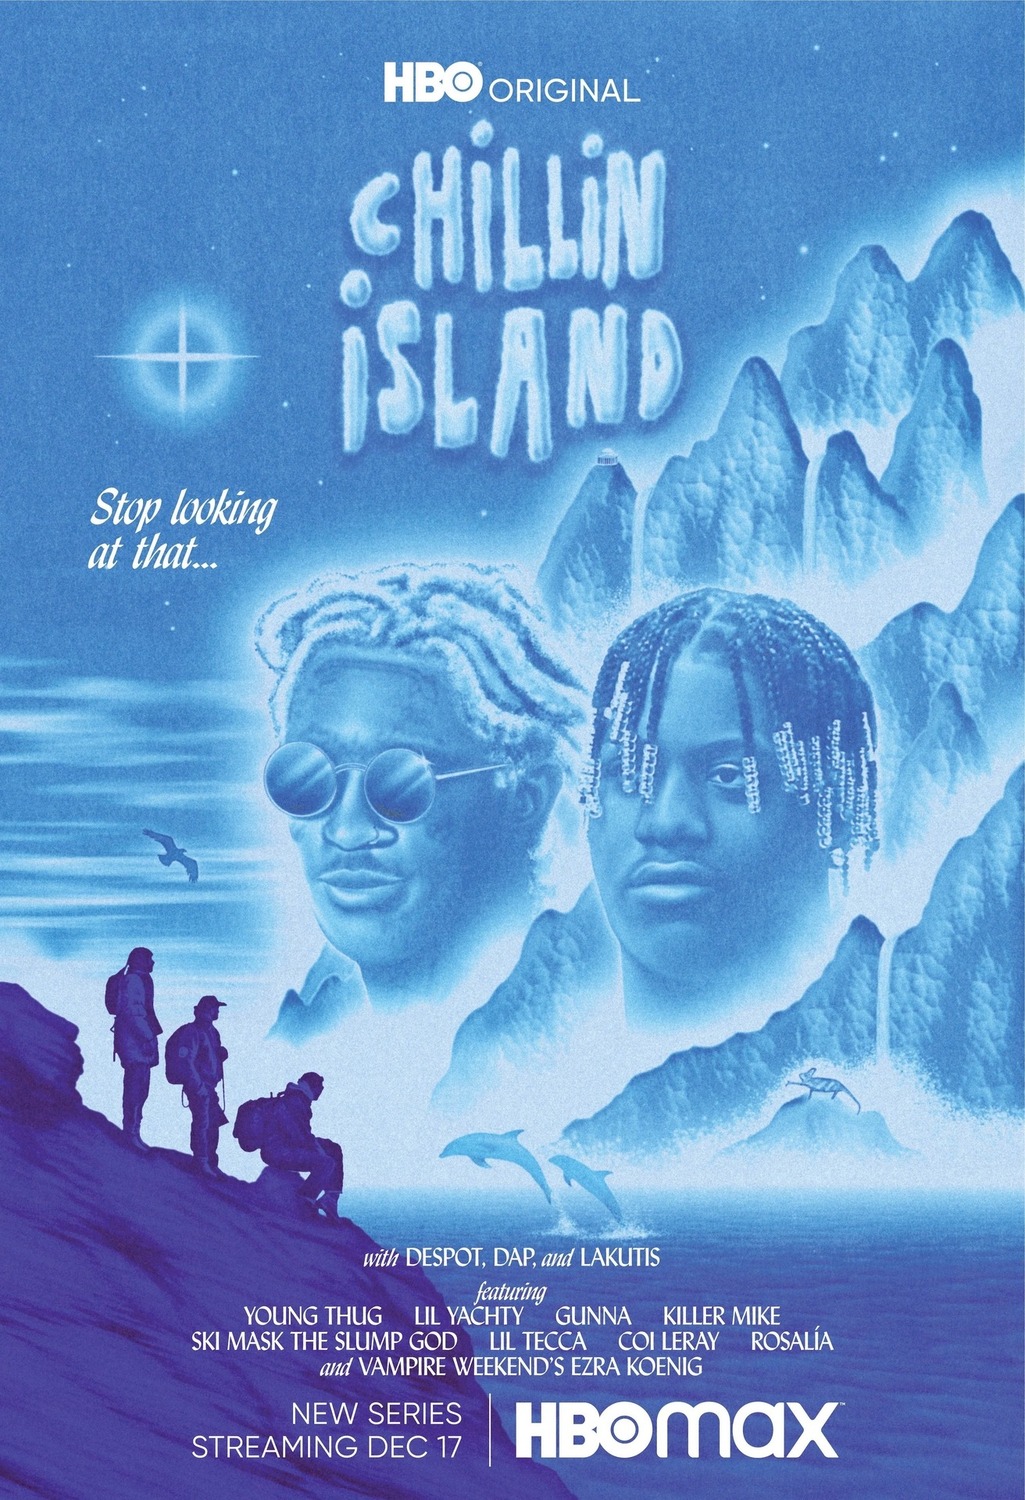 Extra Large TV Poster Image for Chillin Island 